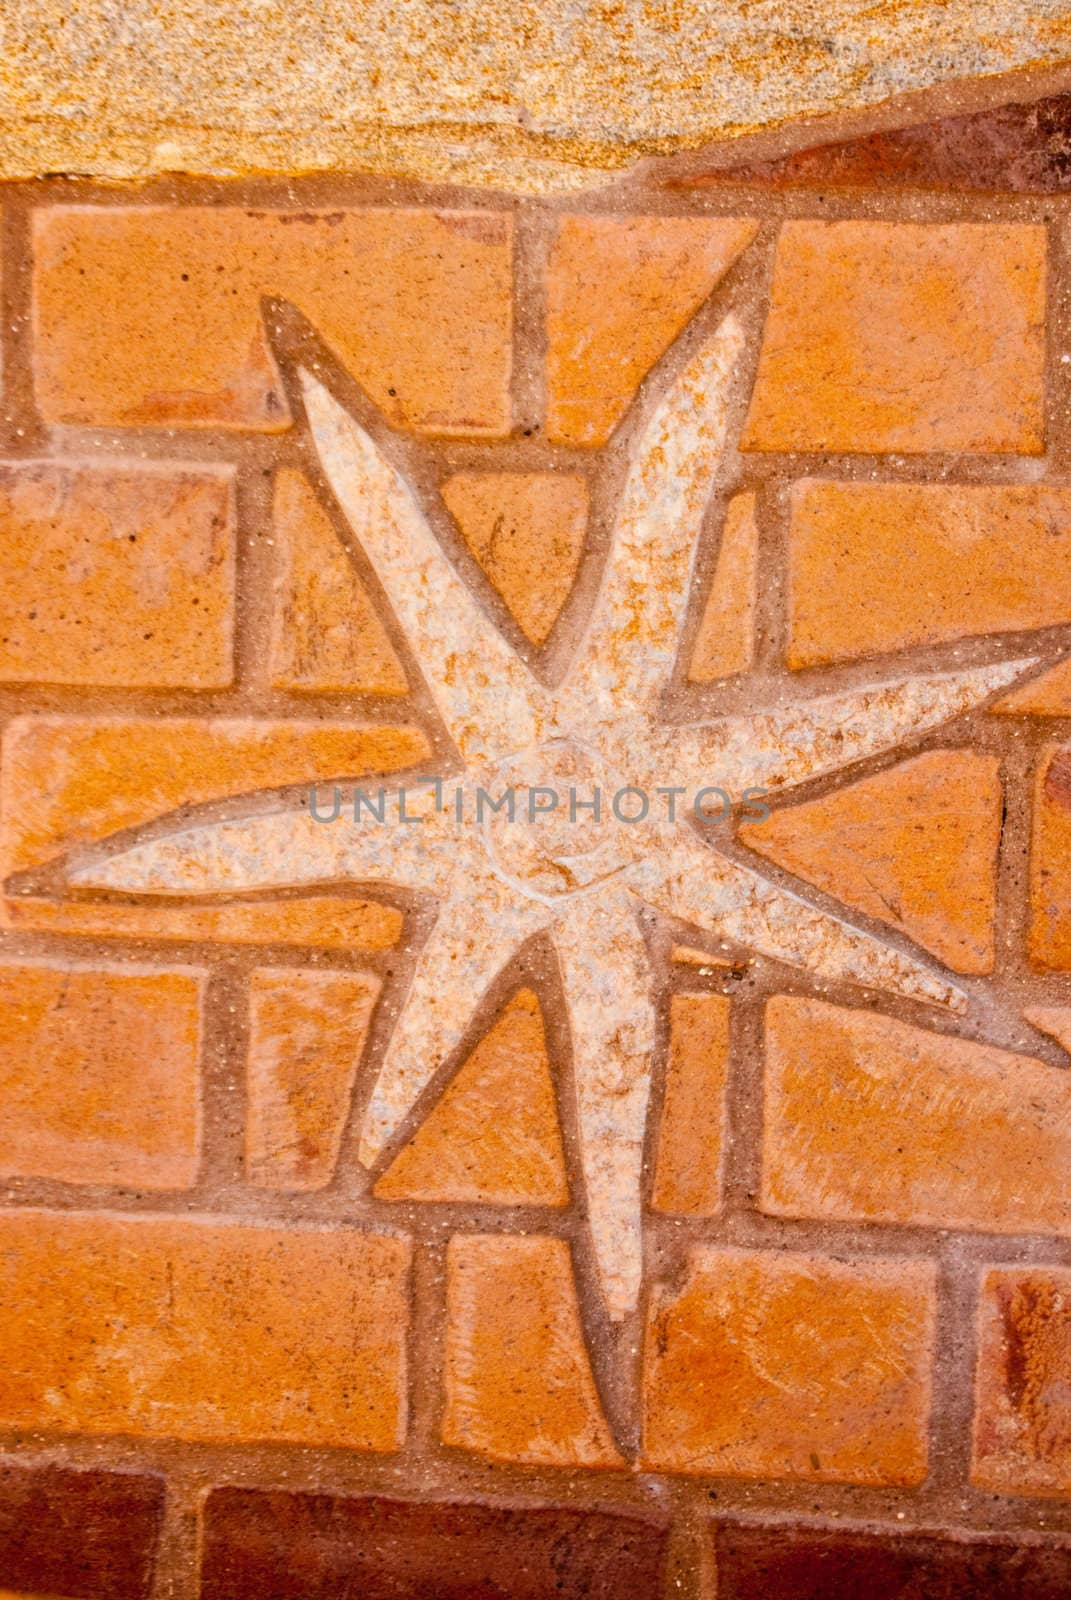 Star mosaic of textures stone on brick.